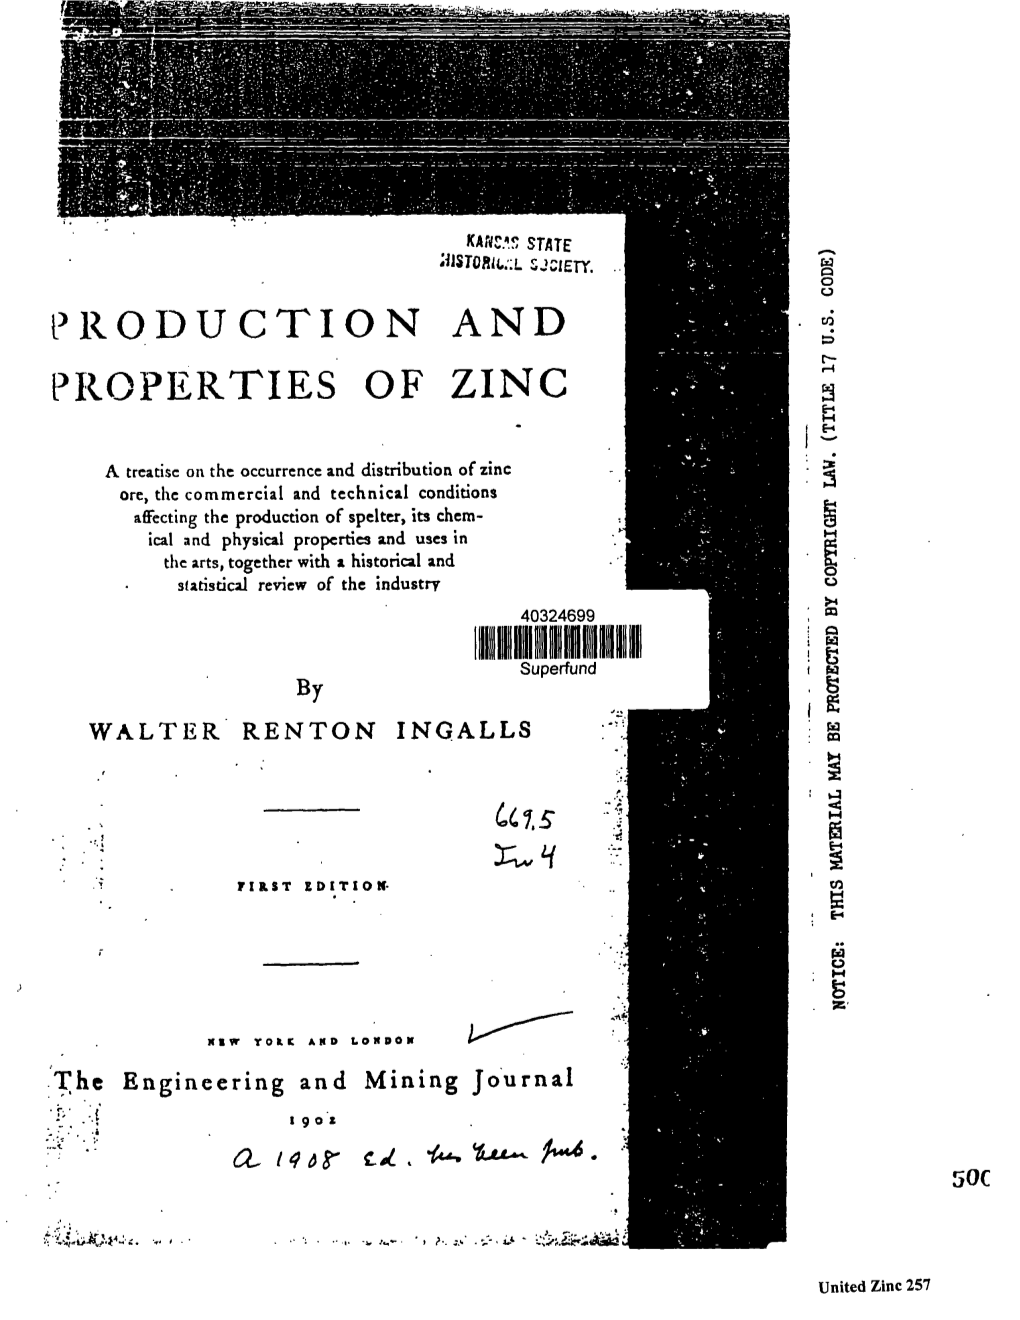 Book Excerpt Entitled, "Production and Properties of Zinc"